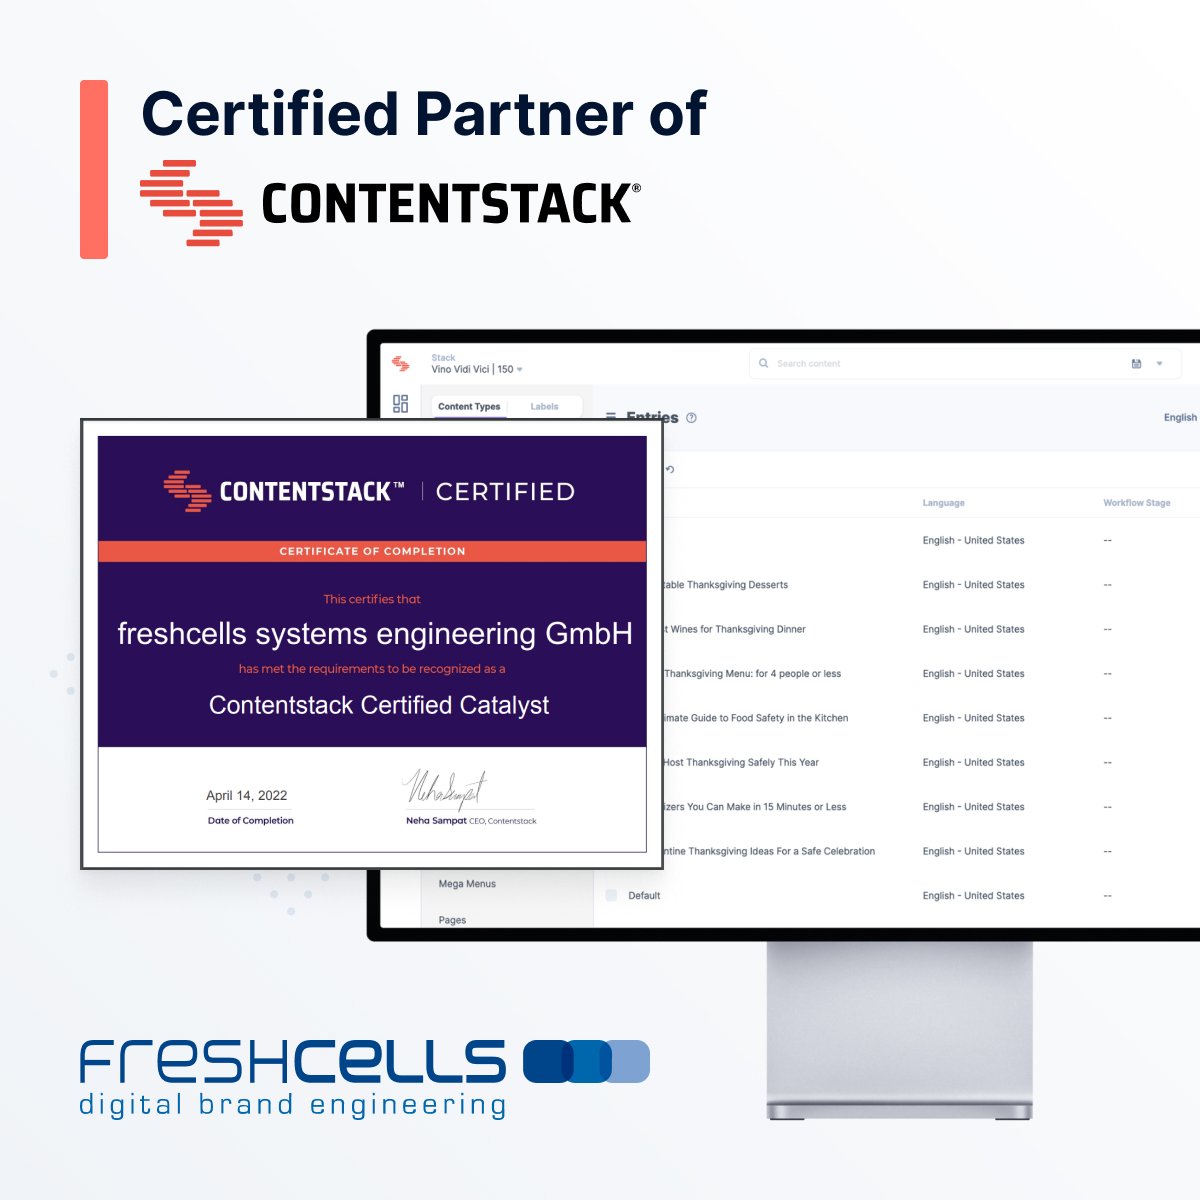 freshcells systems engineering becomes certified partner of Contentstack headless CMS